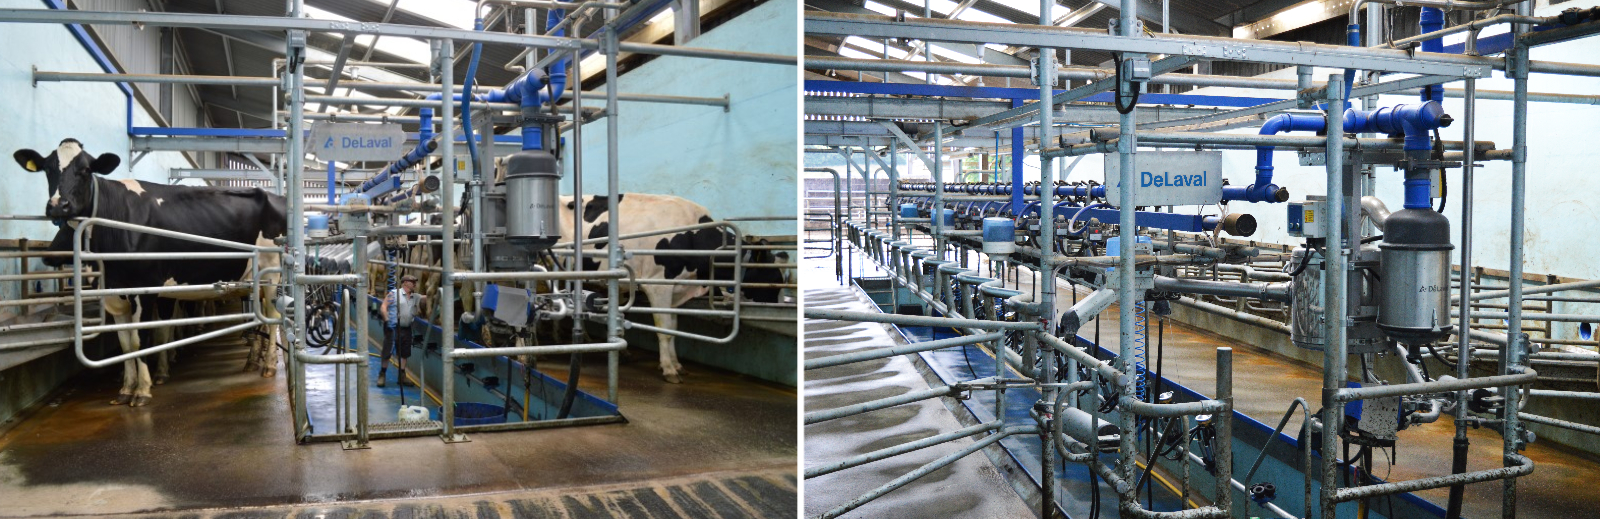 New DeLaval 16-32 milking parlour in action